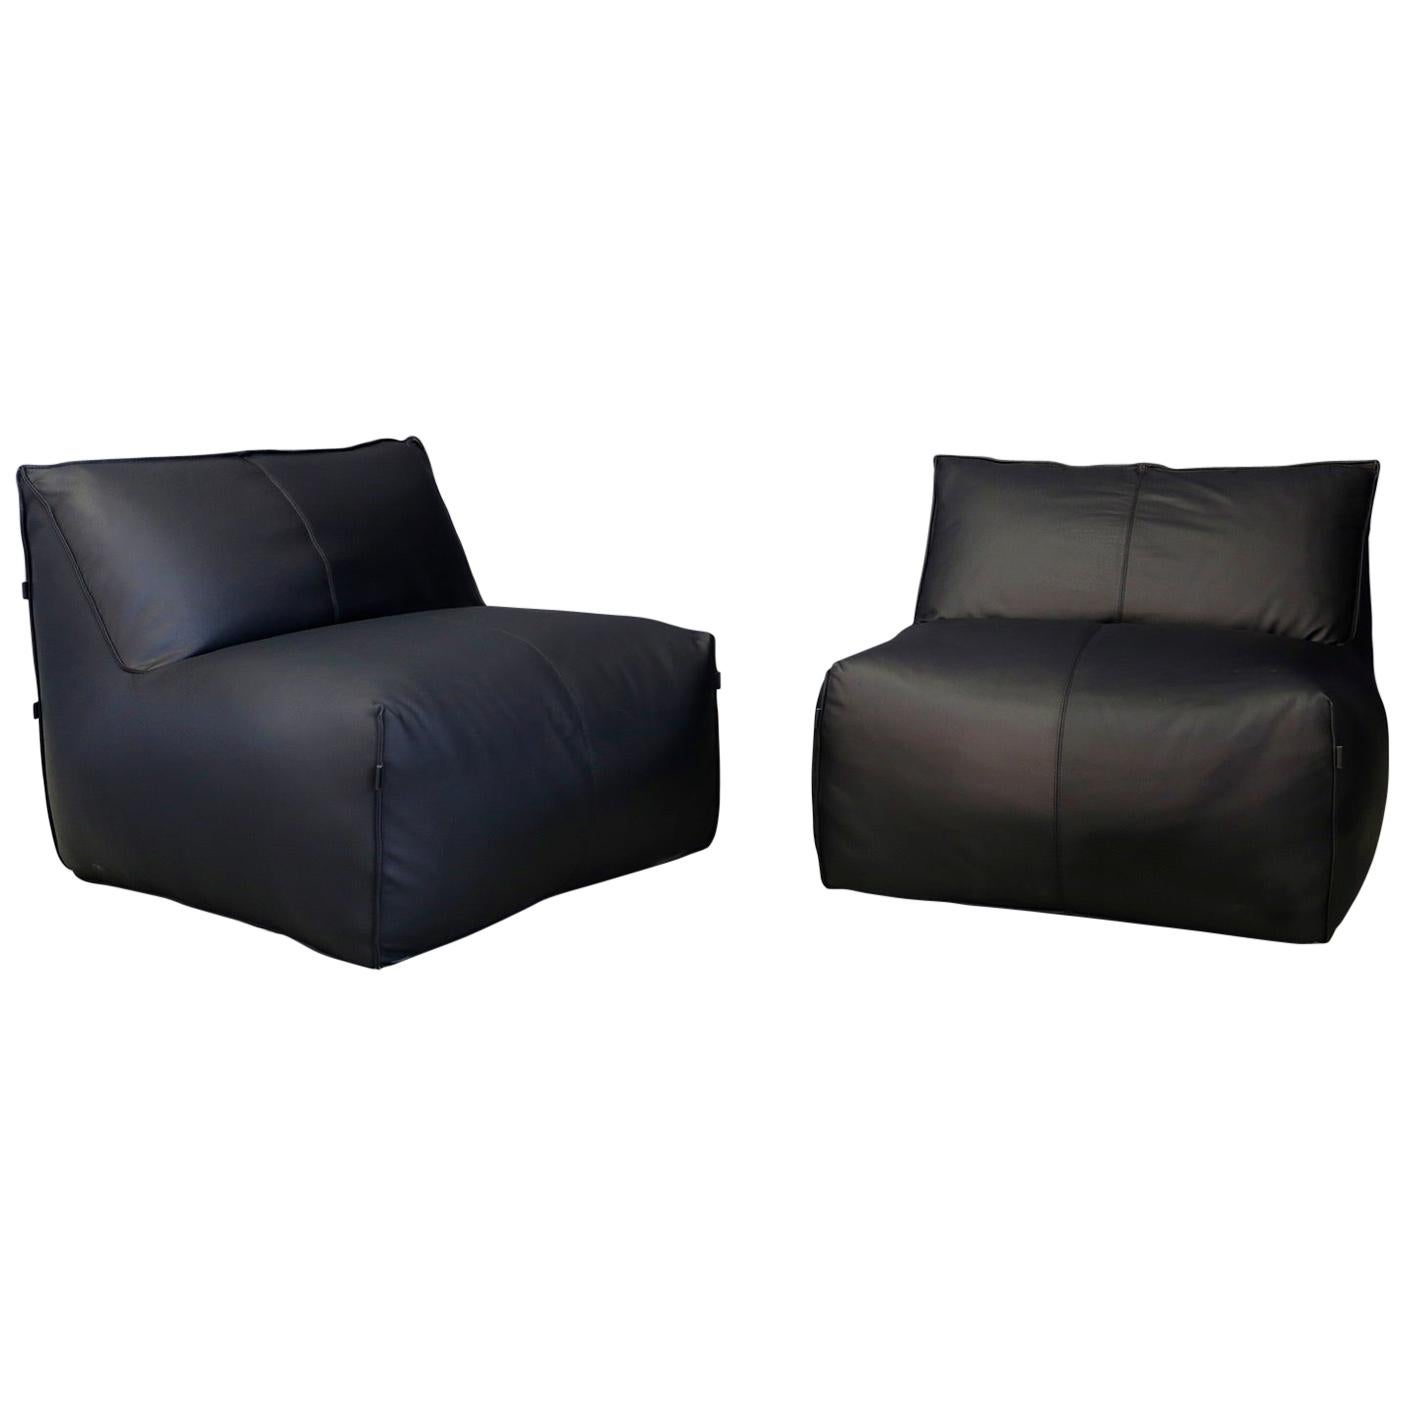 Pair of Armchairs "Le Bambole" in Black Leather by Mario Bellini for B&B Italia